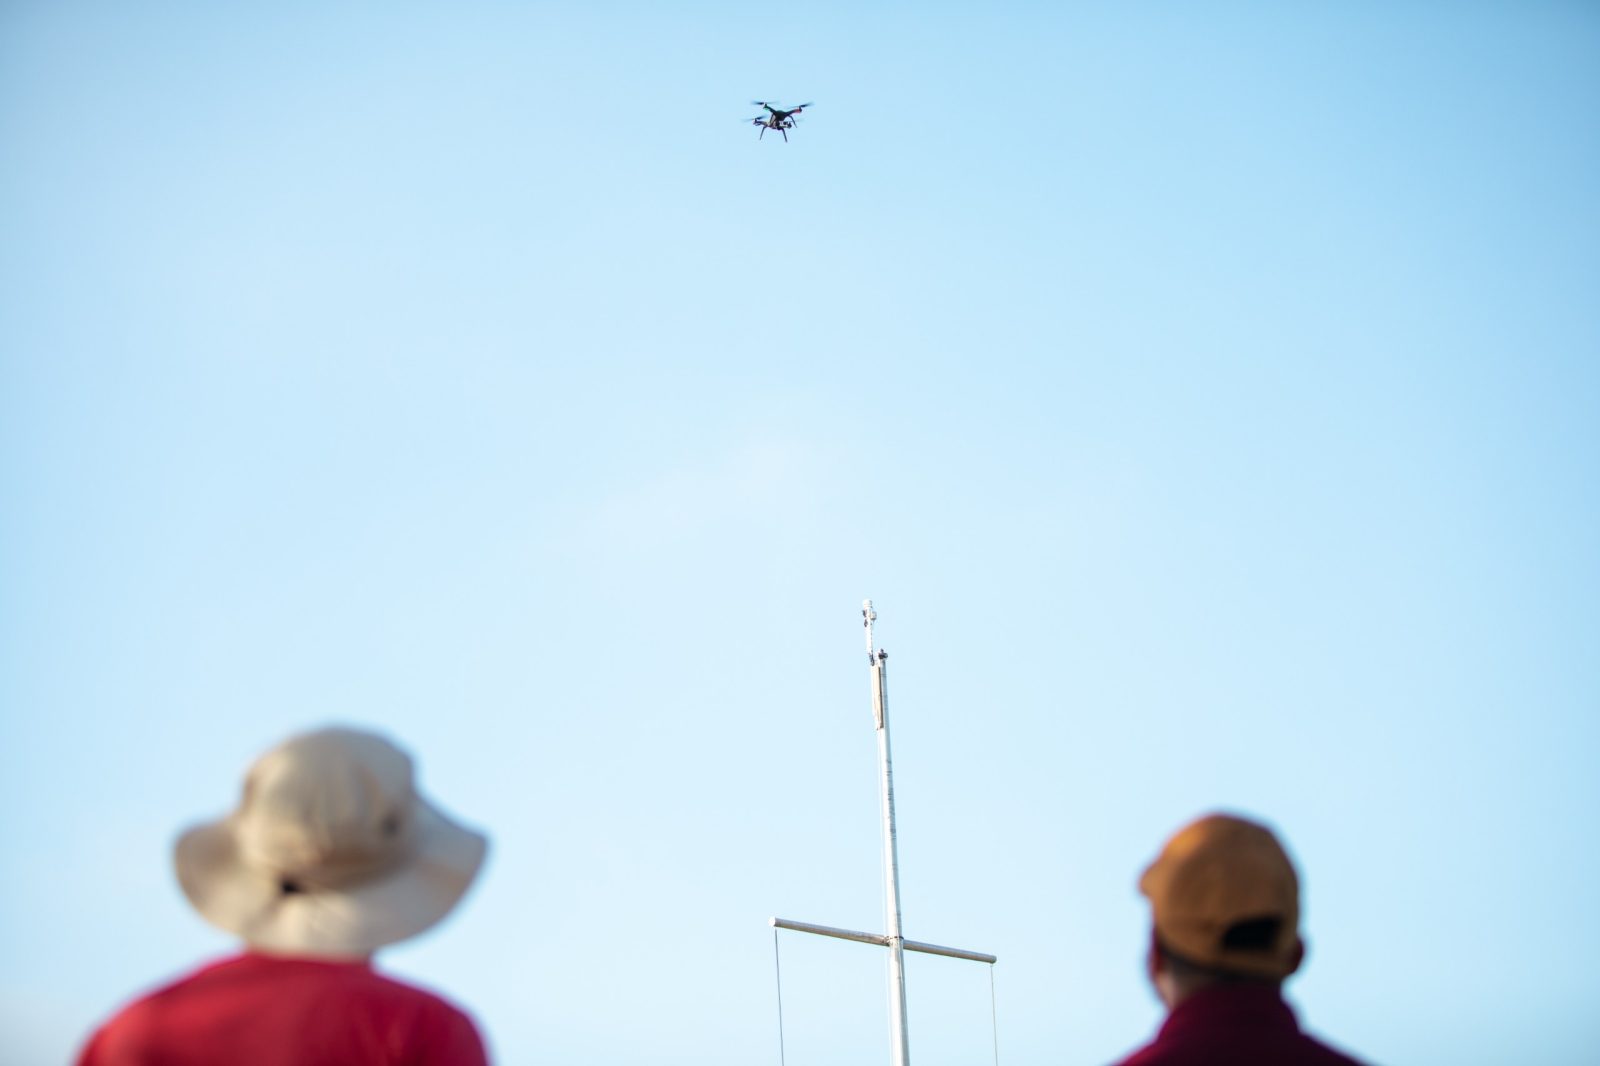 Virginia Tech graduate students Landon Bilyeu (left) and Javier Gonzalez-Rocha (right) use a drone to monitor wind at Grand Lake St. Marys, Ohio. A black drone hovers above a white nautical telescoping flagpole, with a brilliantly clear blue sky creating a stark contrast. Courtesy of Christina+David.